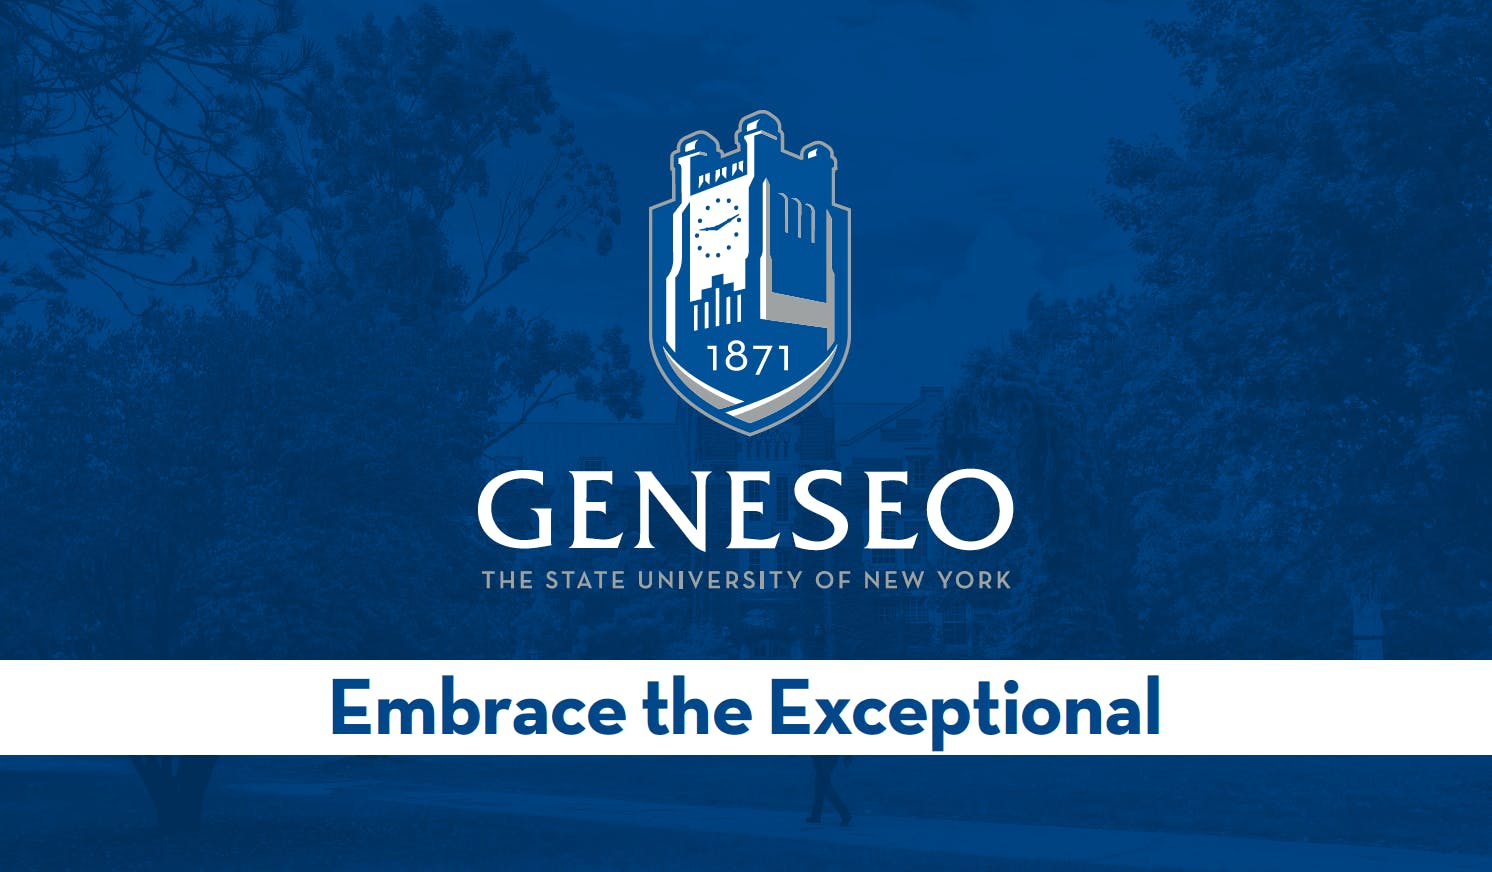 Ad for Geneseo